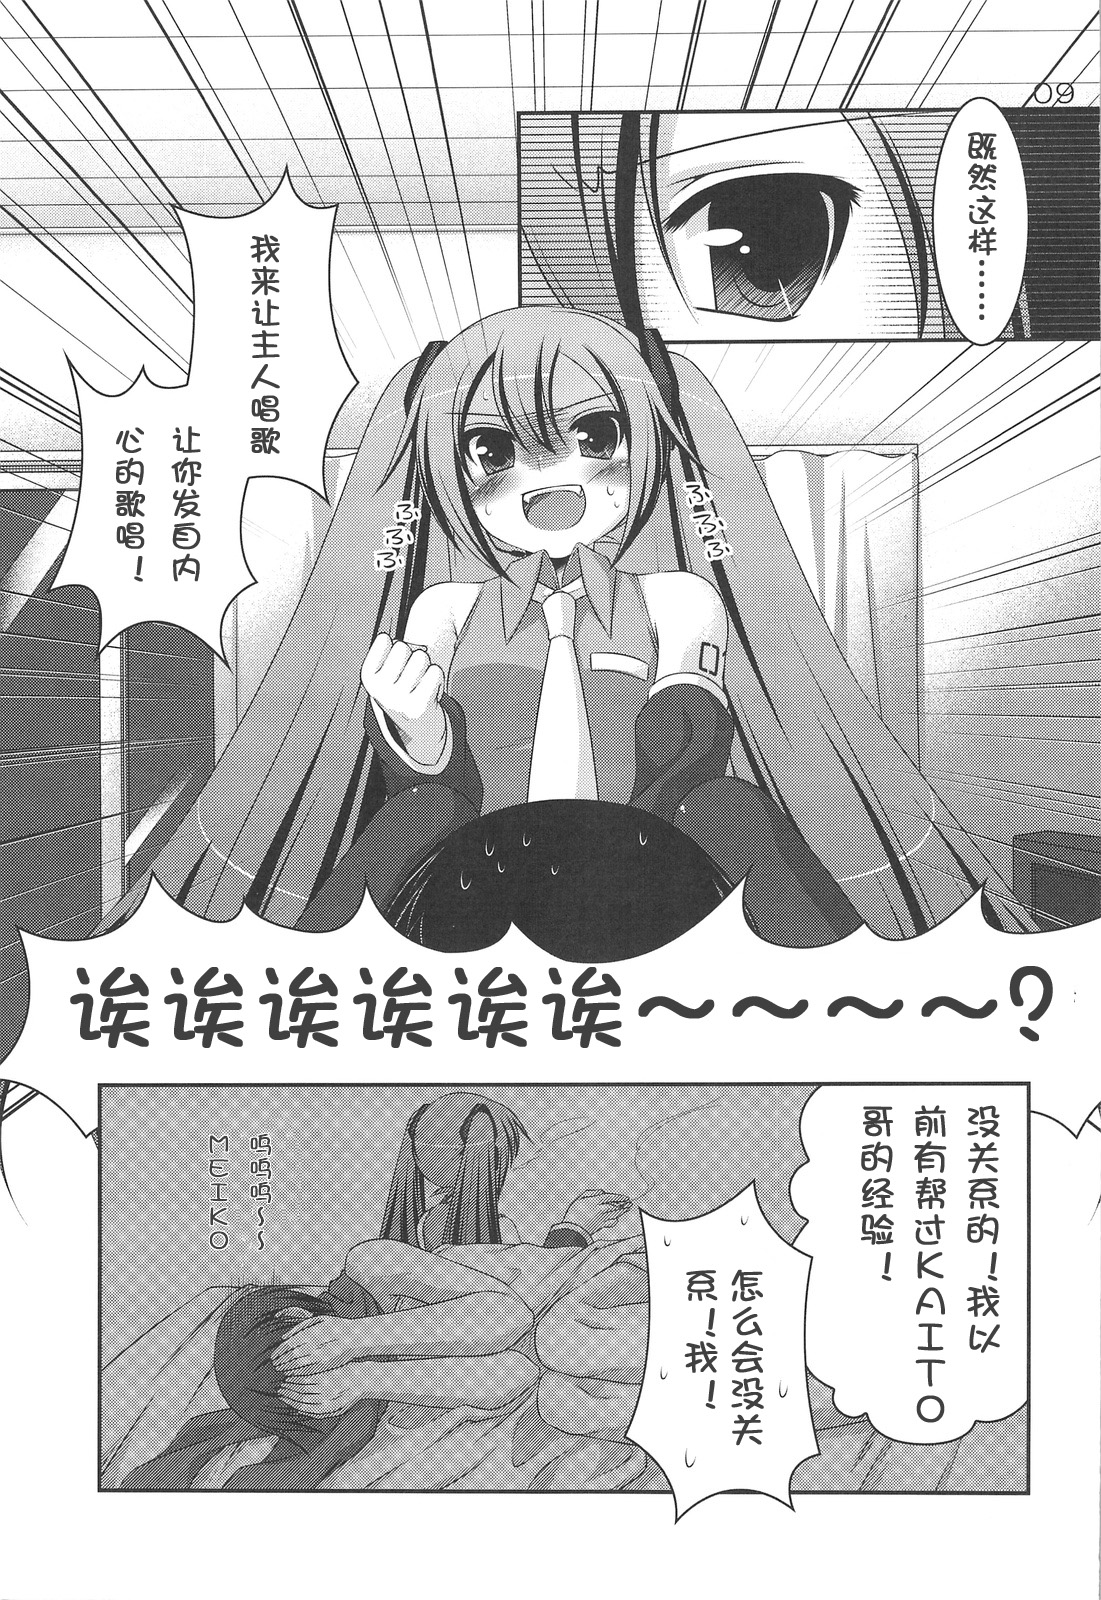 (C75) [Etcycle] Do Hentai Miku (Vocaloid) (CN) (C75) (同人誌) [ETCYCLE(はづき)] ド変態ミク (初音ミク)